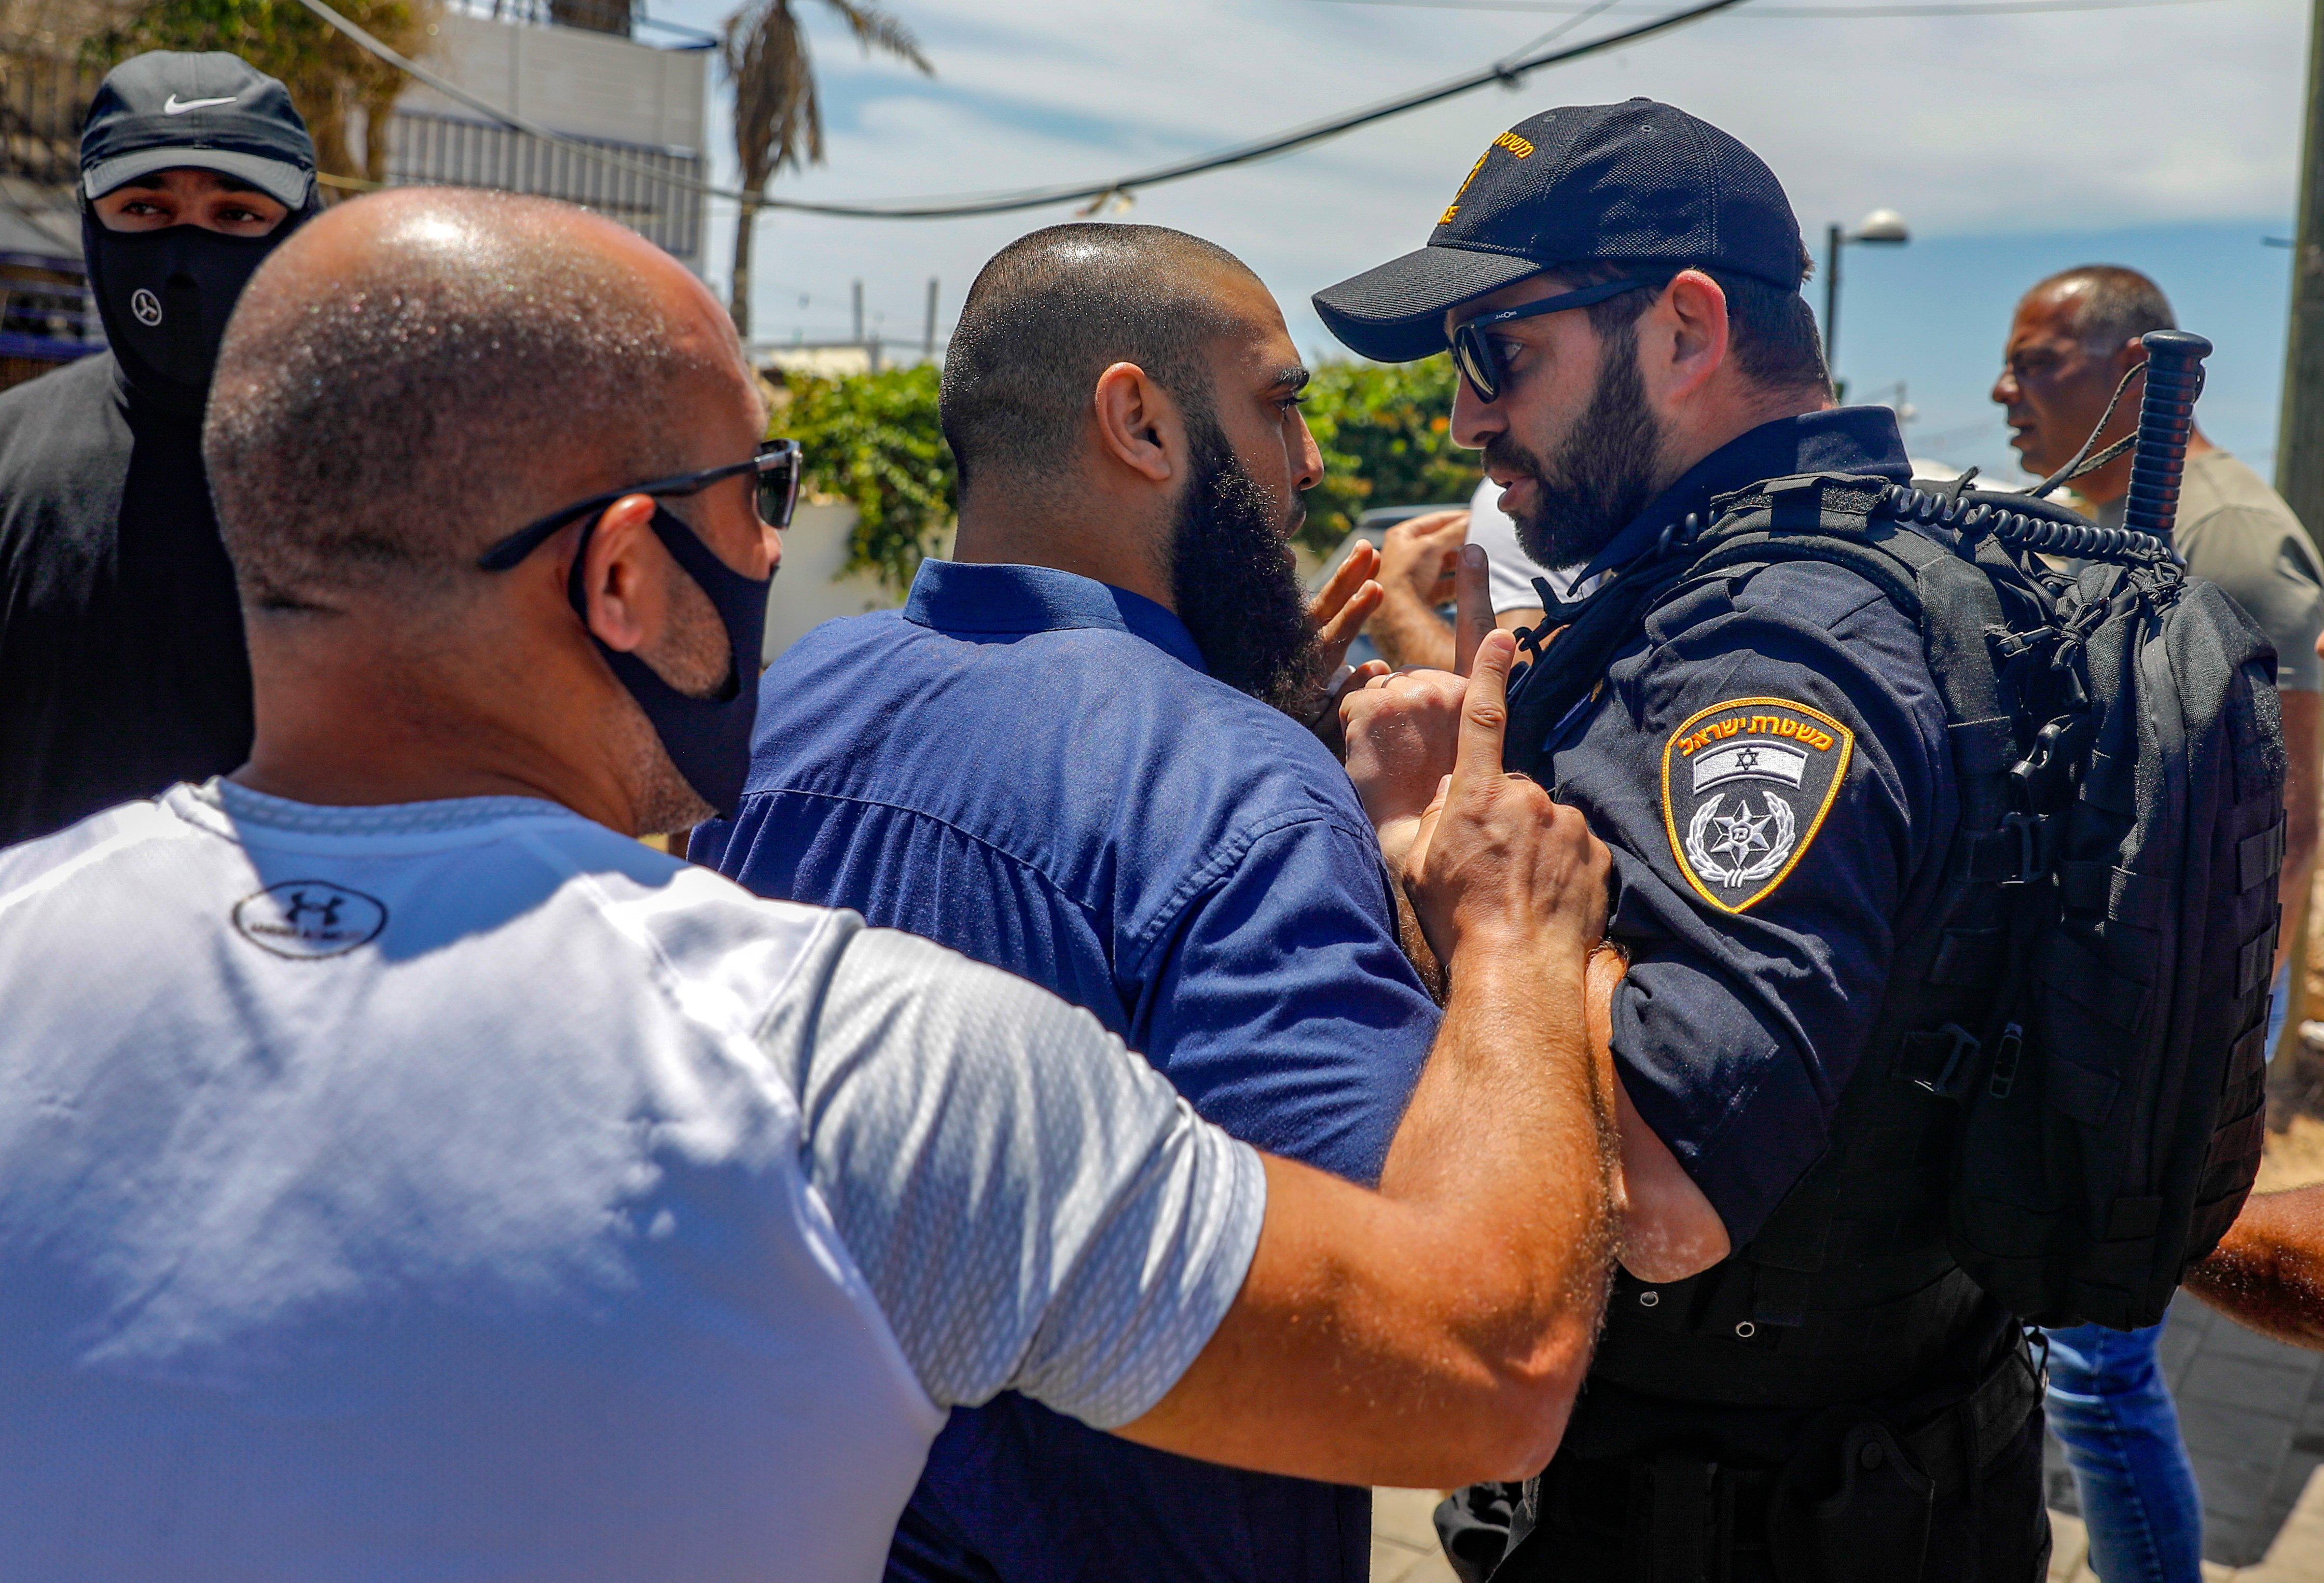 A Palestinian citizen of Israel calls out Israeli police forces during a demonstration in Jaffa over the fate of al-Isaaf cemetery on 12 June 2020 (AFP)